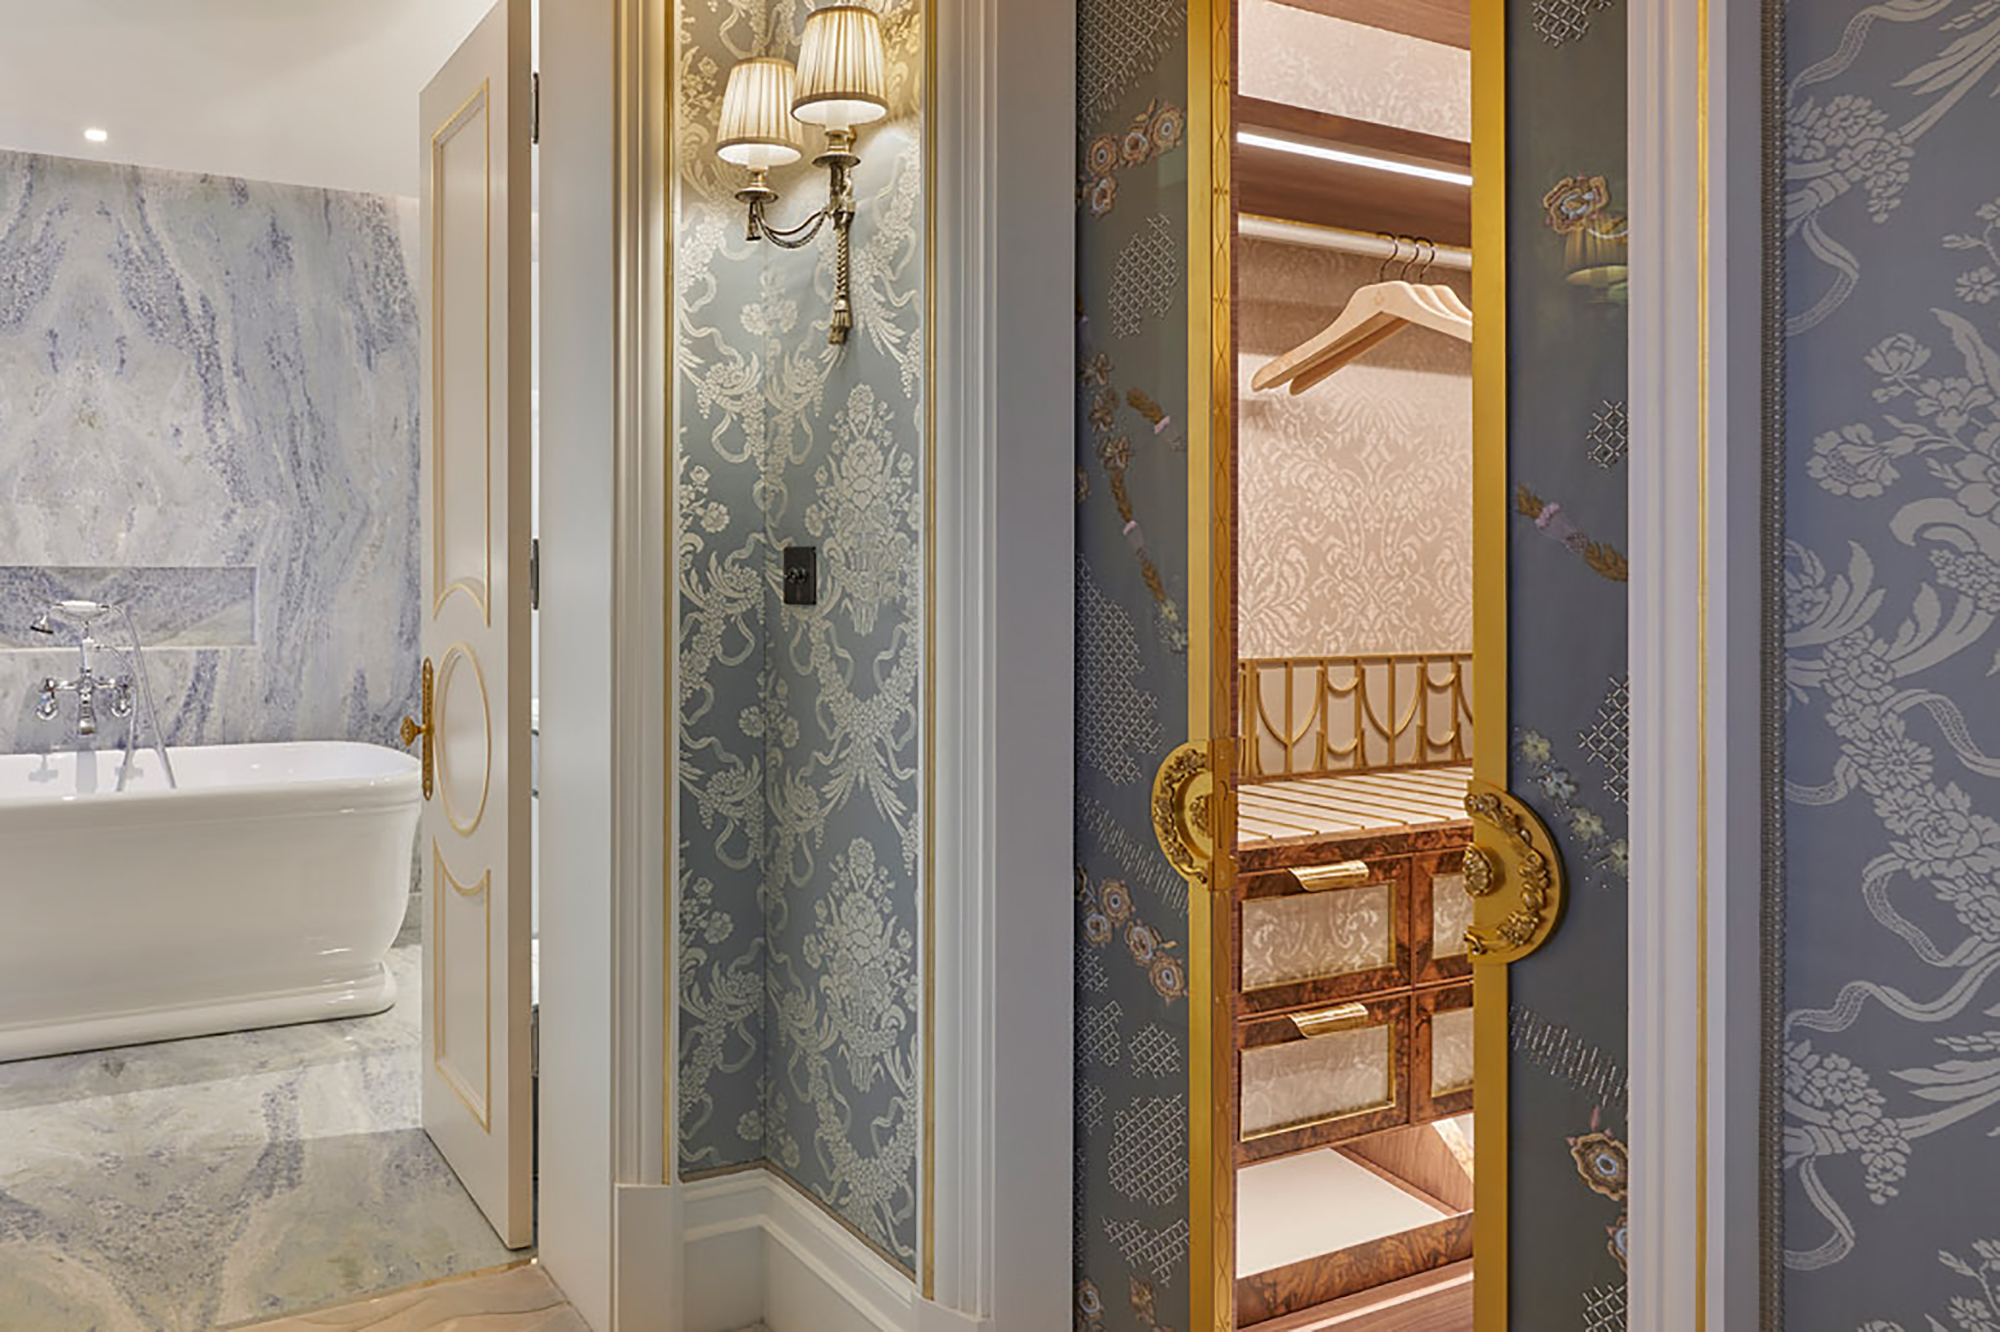 Bespoke sliding doors made by Collier Webb for Claridge's Royal Suite